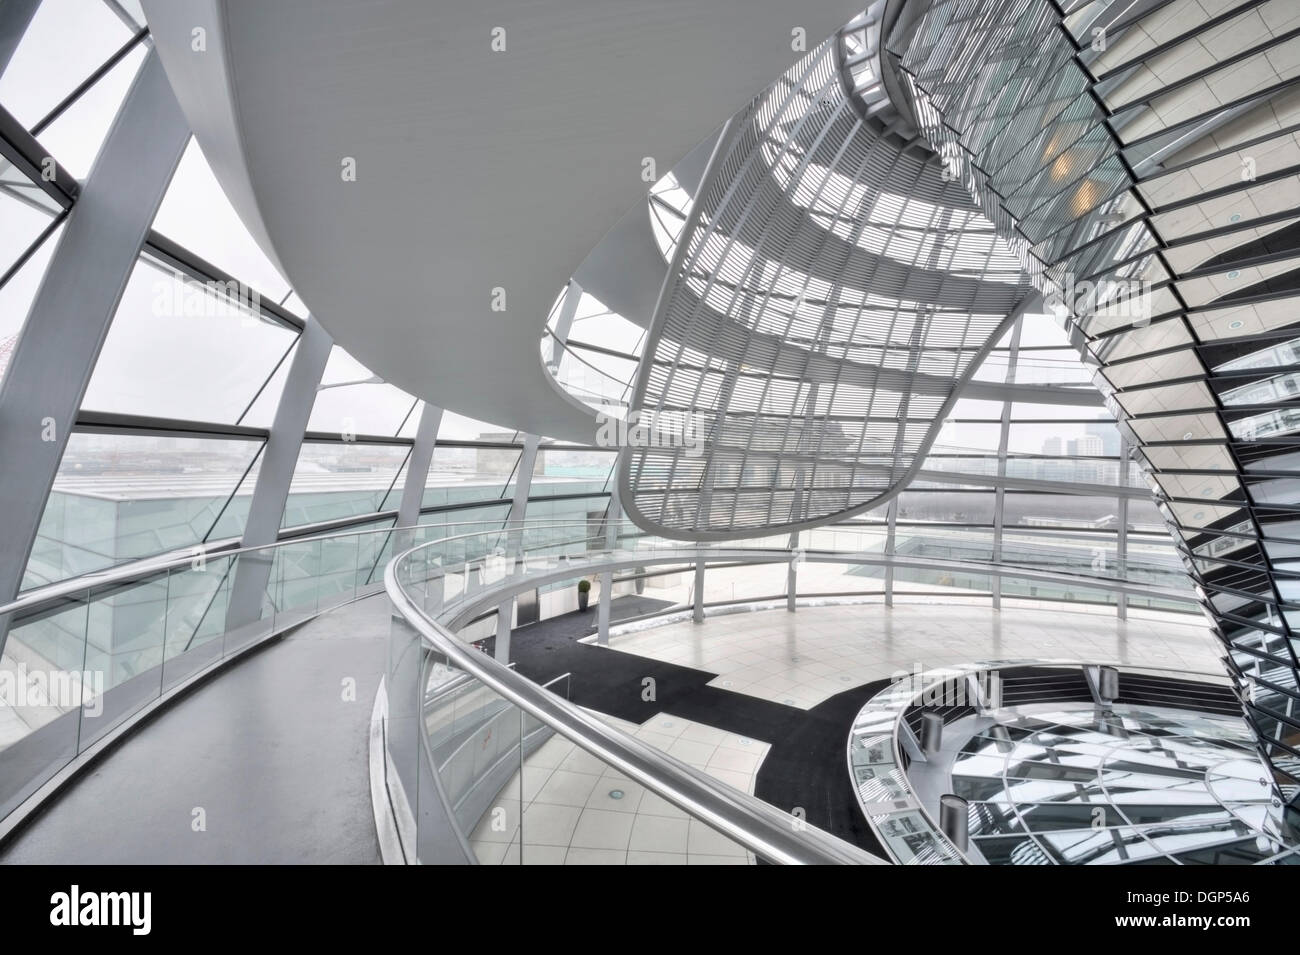 Interior shot of the glass dome on the Reichstag building, Mitte, Berlin Stock Photo